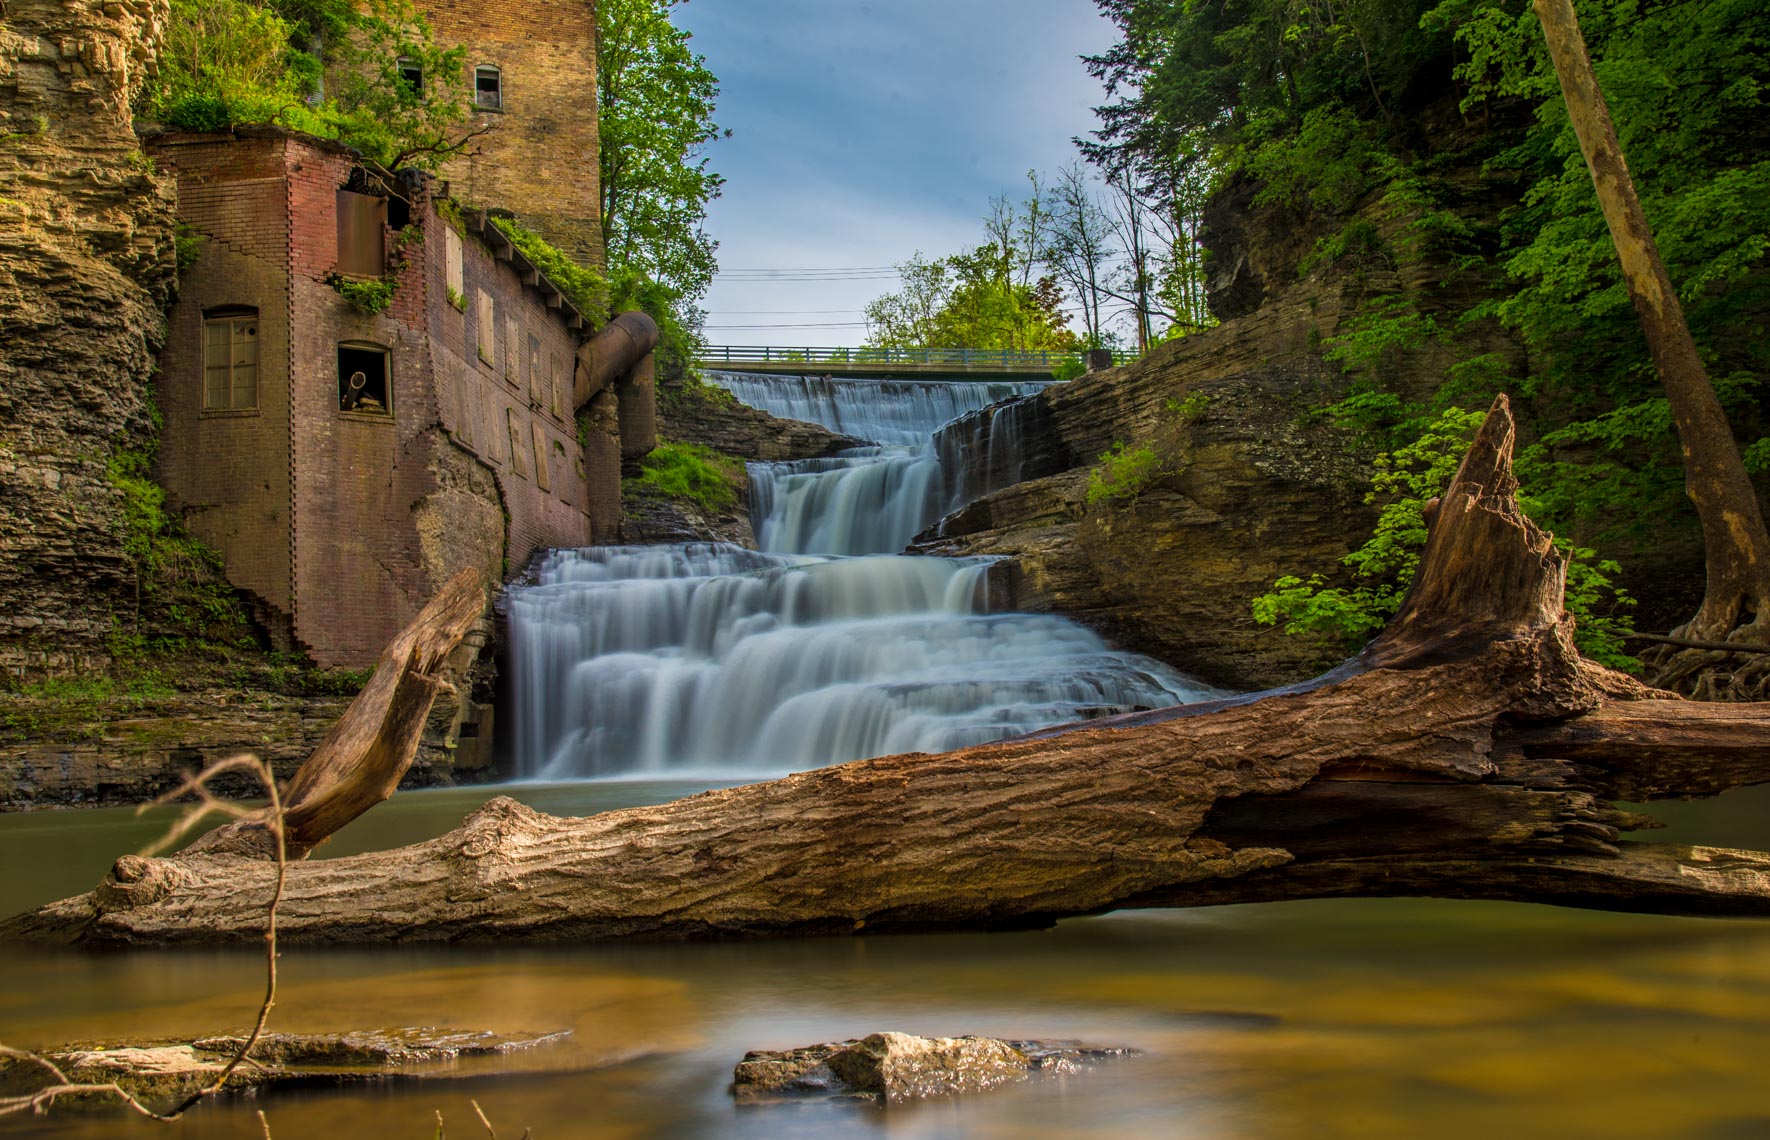 Landscape Photography, Ithica, New York, Gorges, Waterfall